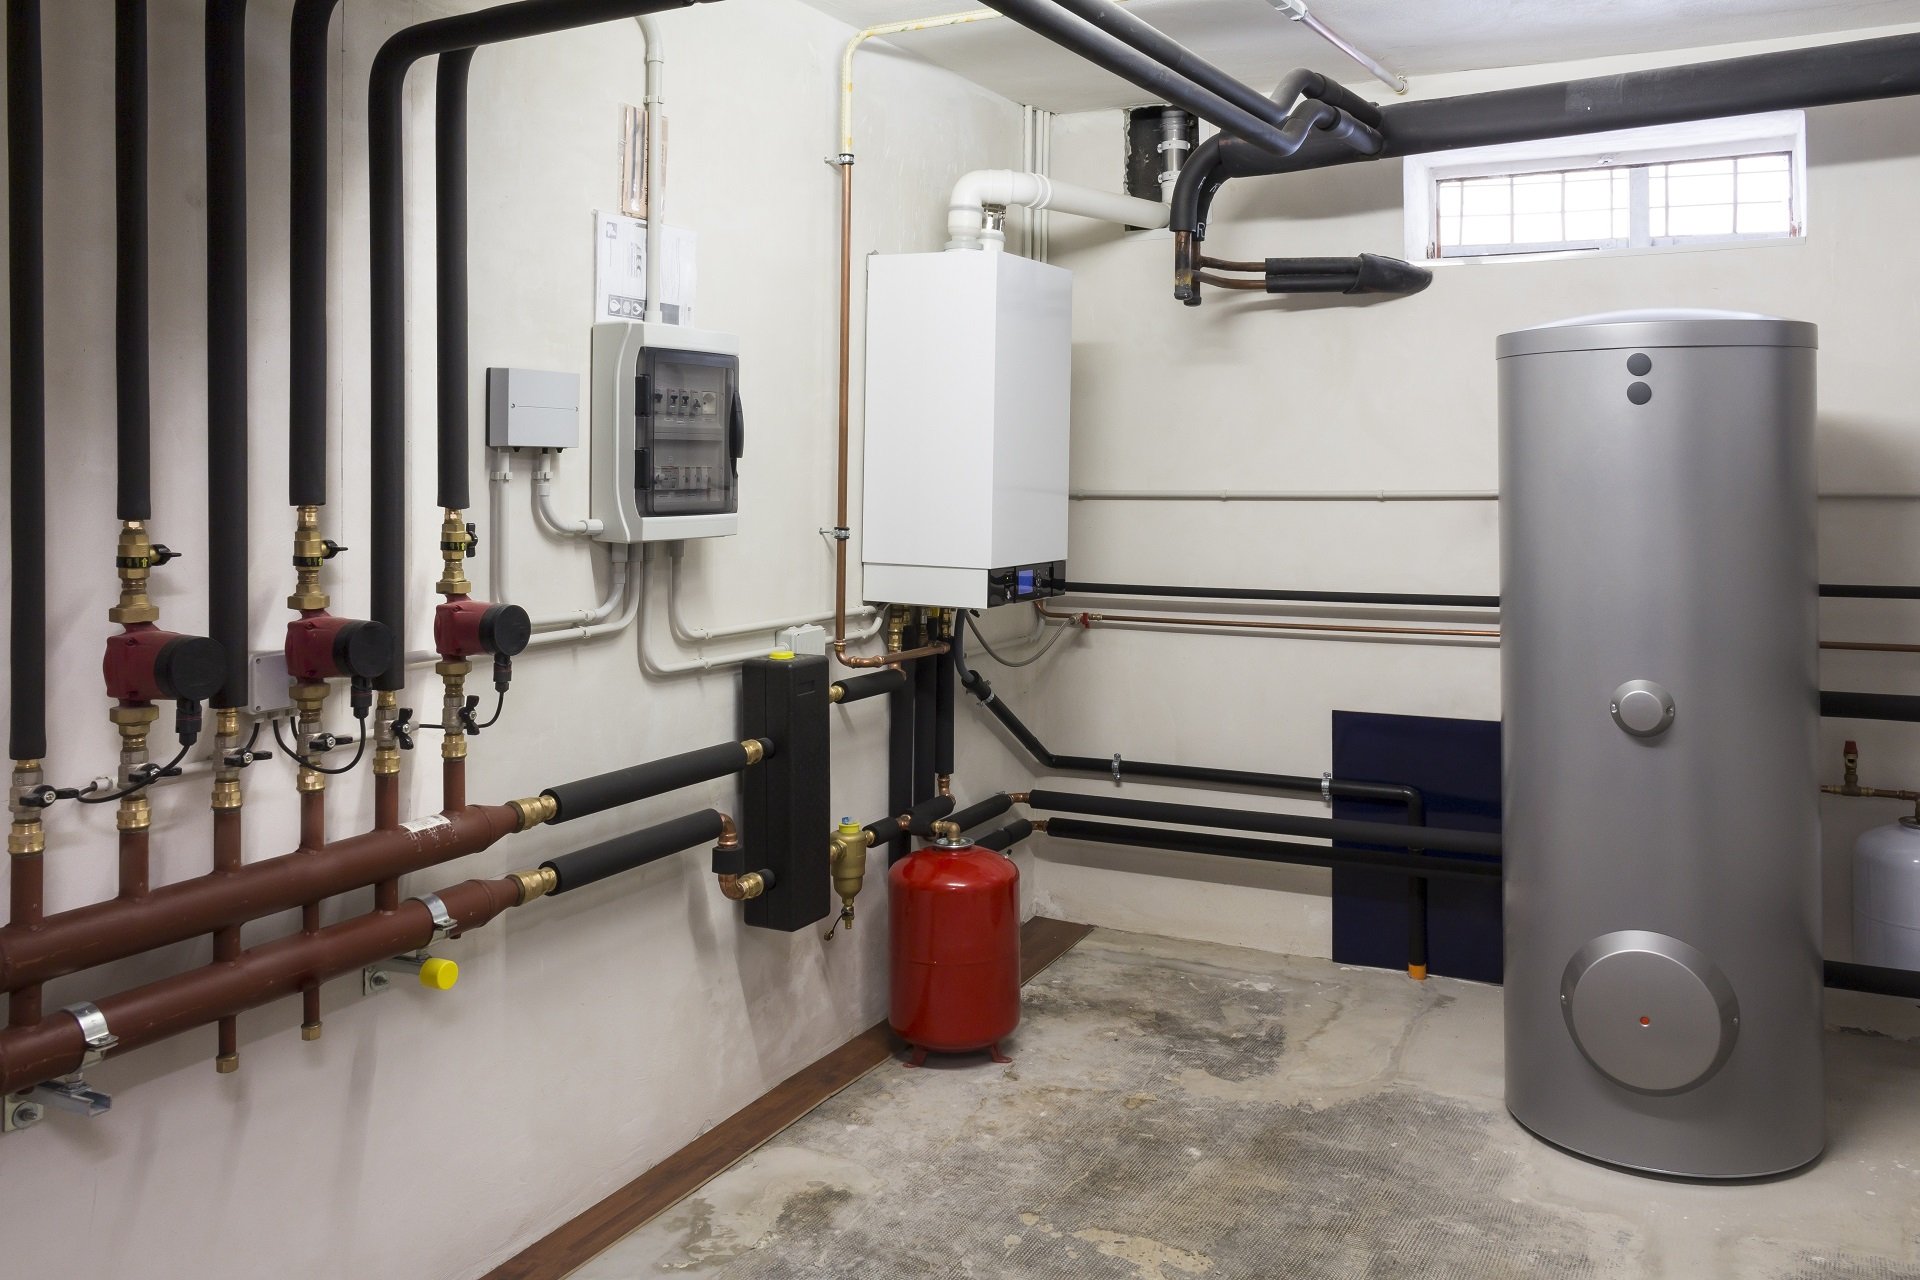 How Do Indirect Water Heaters Work?